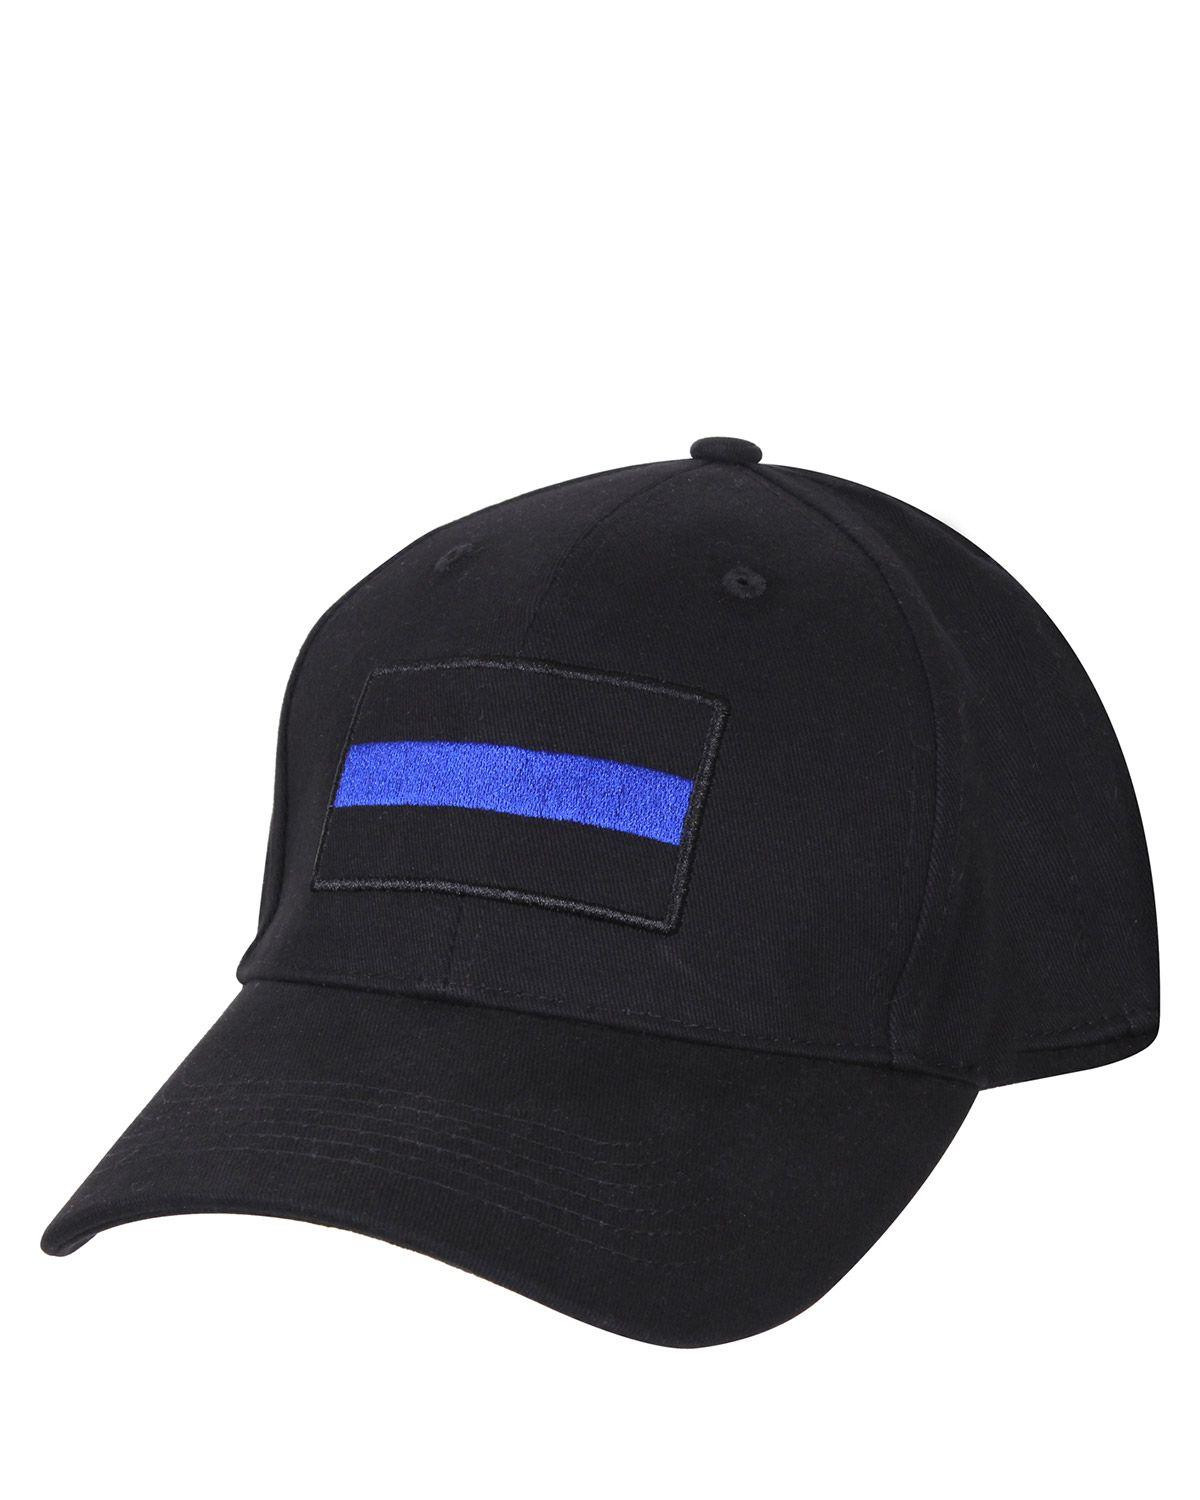 Rothco Low Profile Cap - Single Thin Blue Line (Sort, One Size)